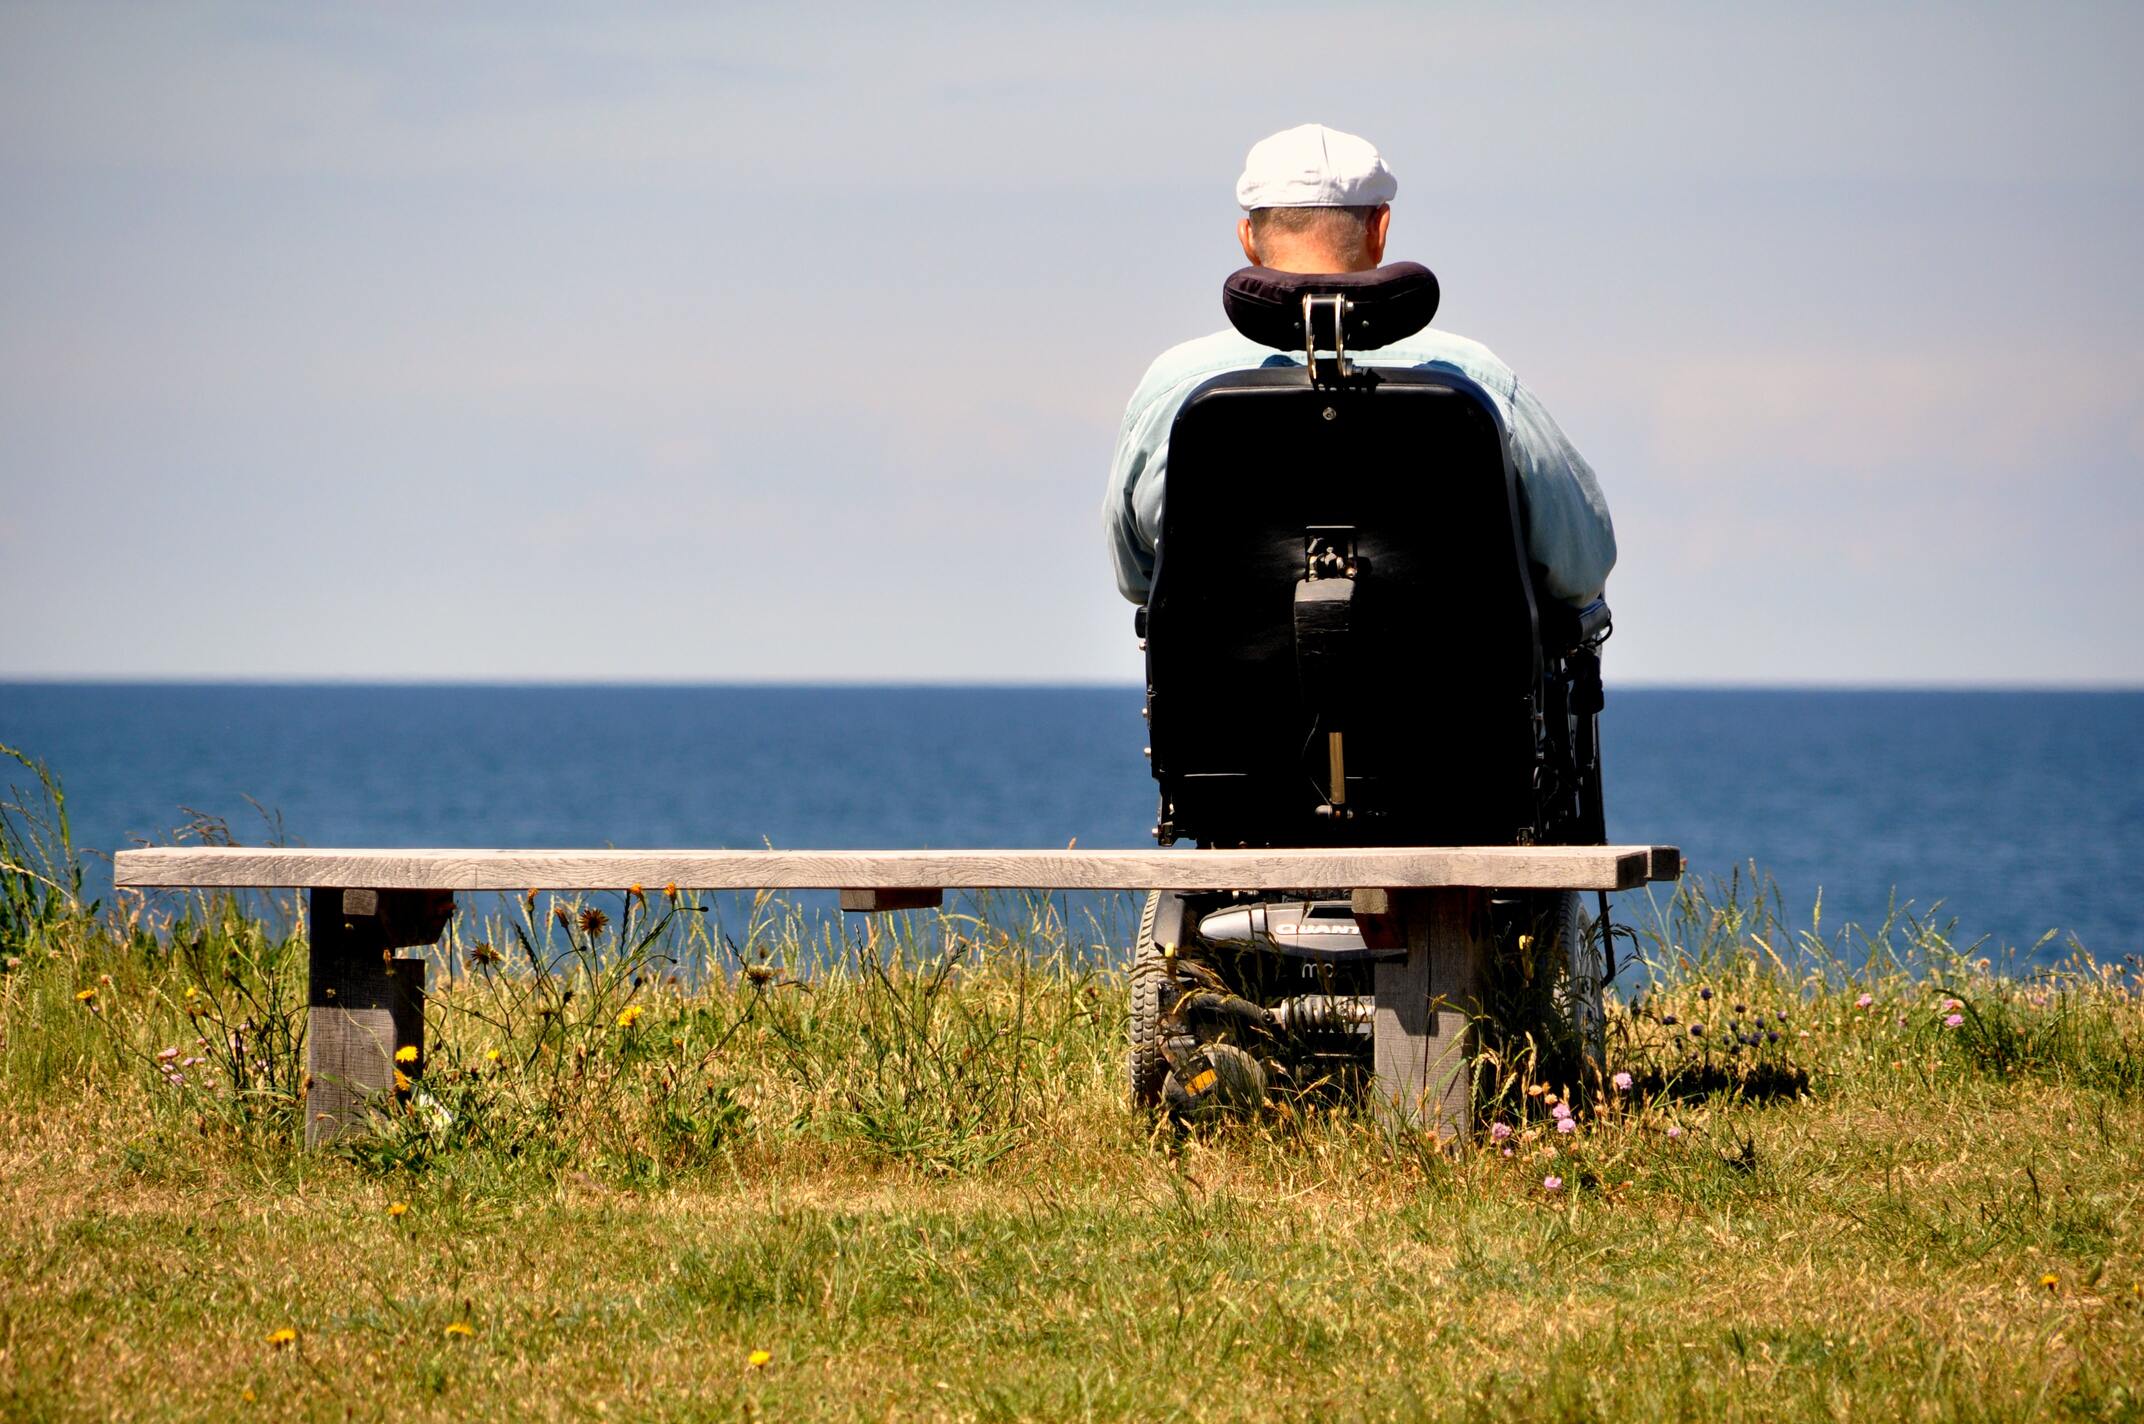 Person in wheelchair overlooking body of water. Used in the article about how sci affects your body's organs.